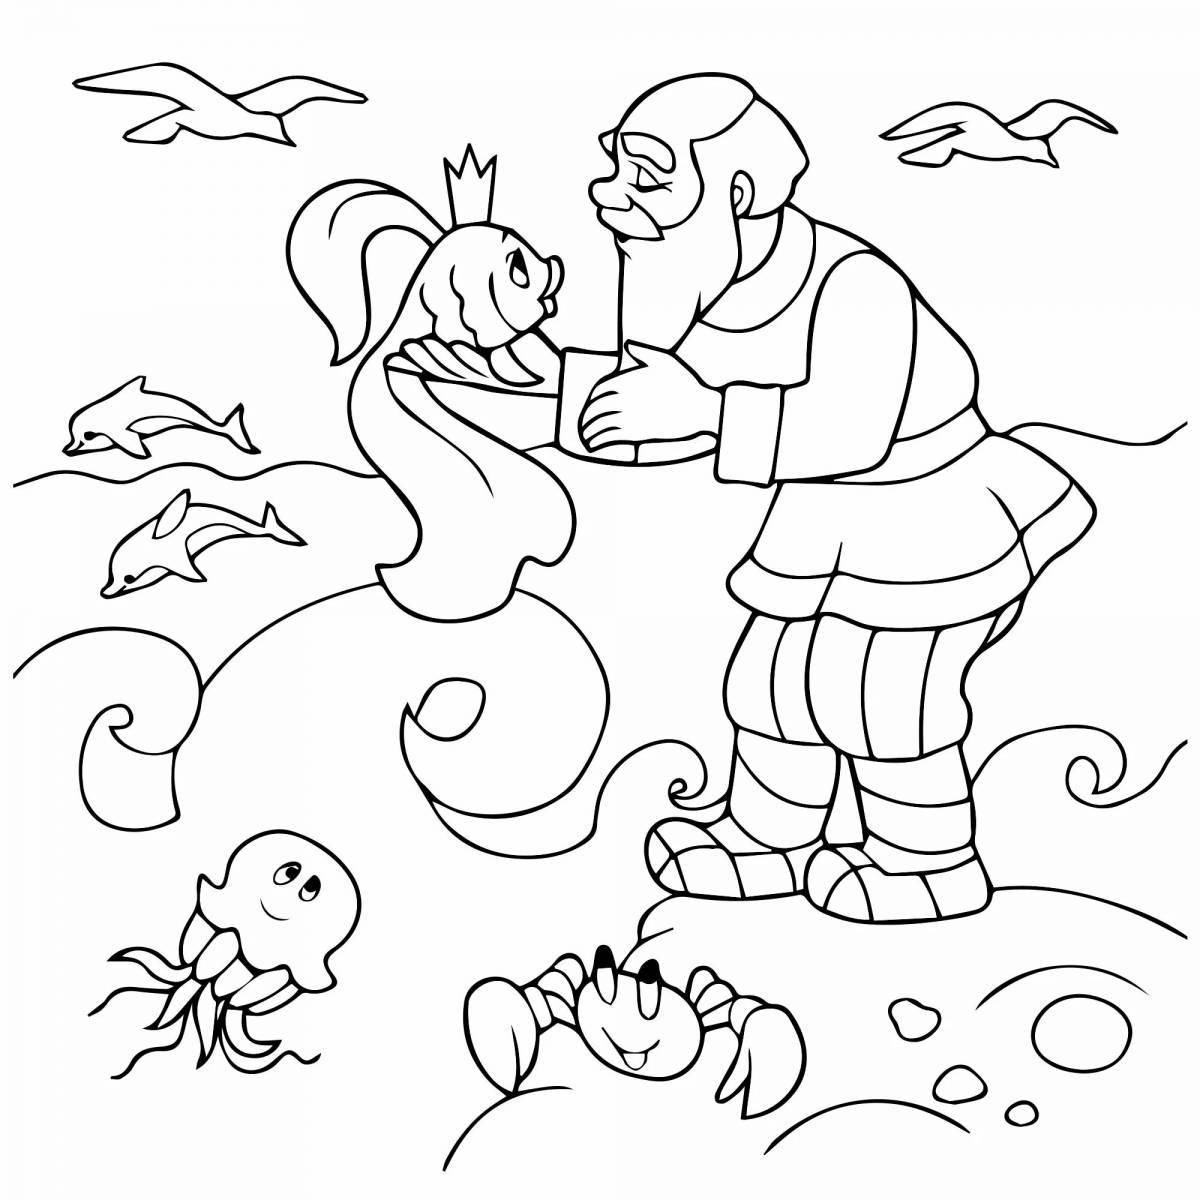 Fun fairy tale coloring book for kids